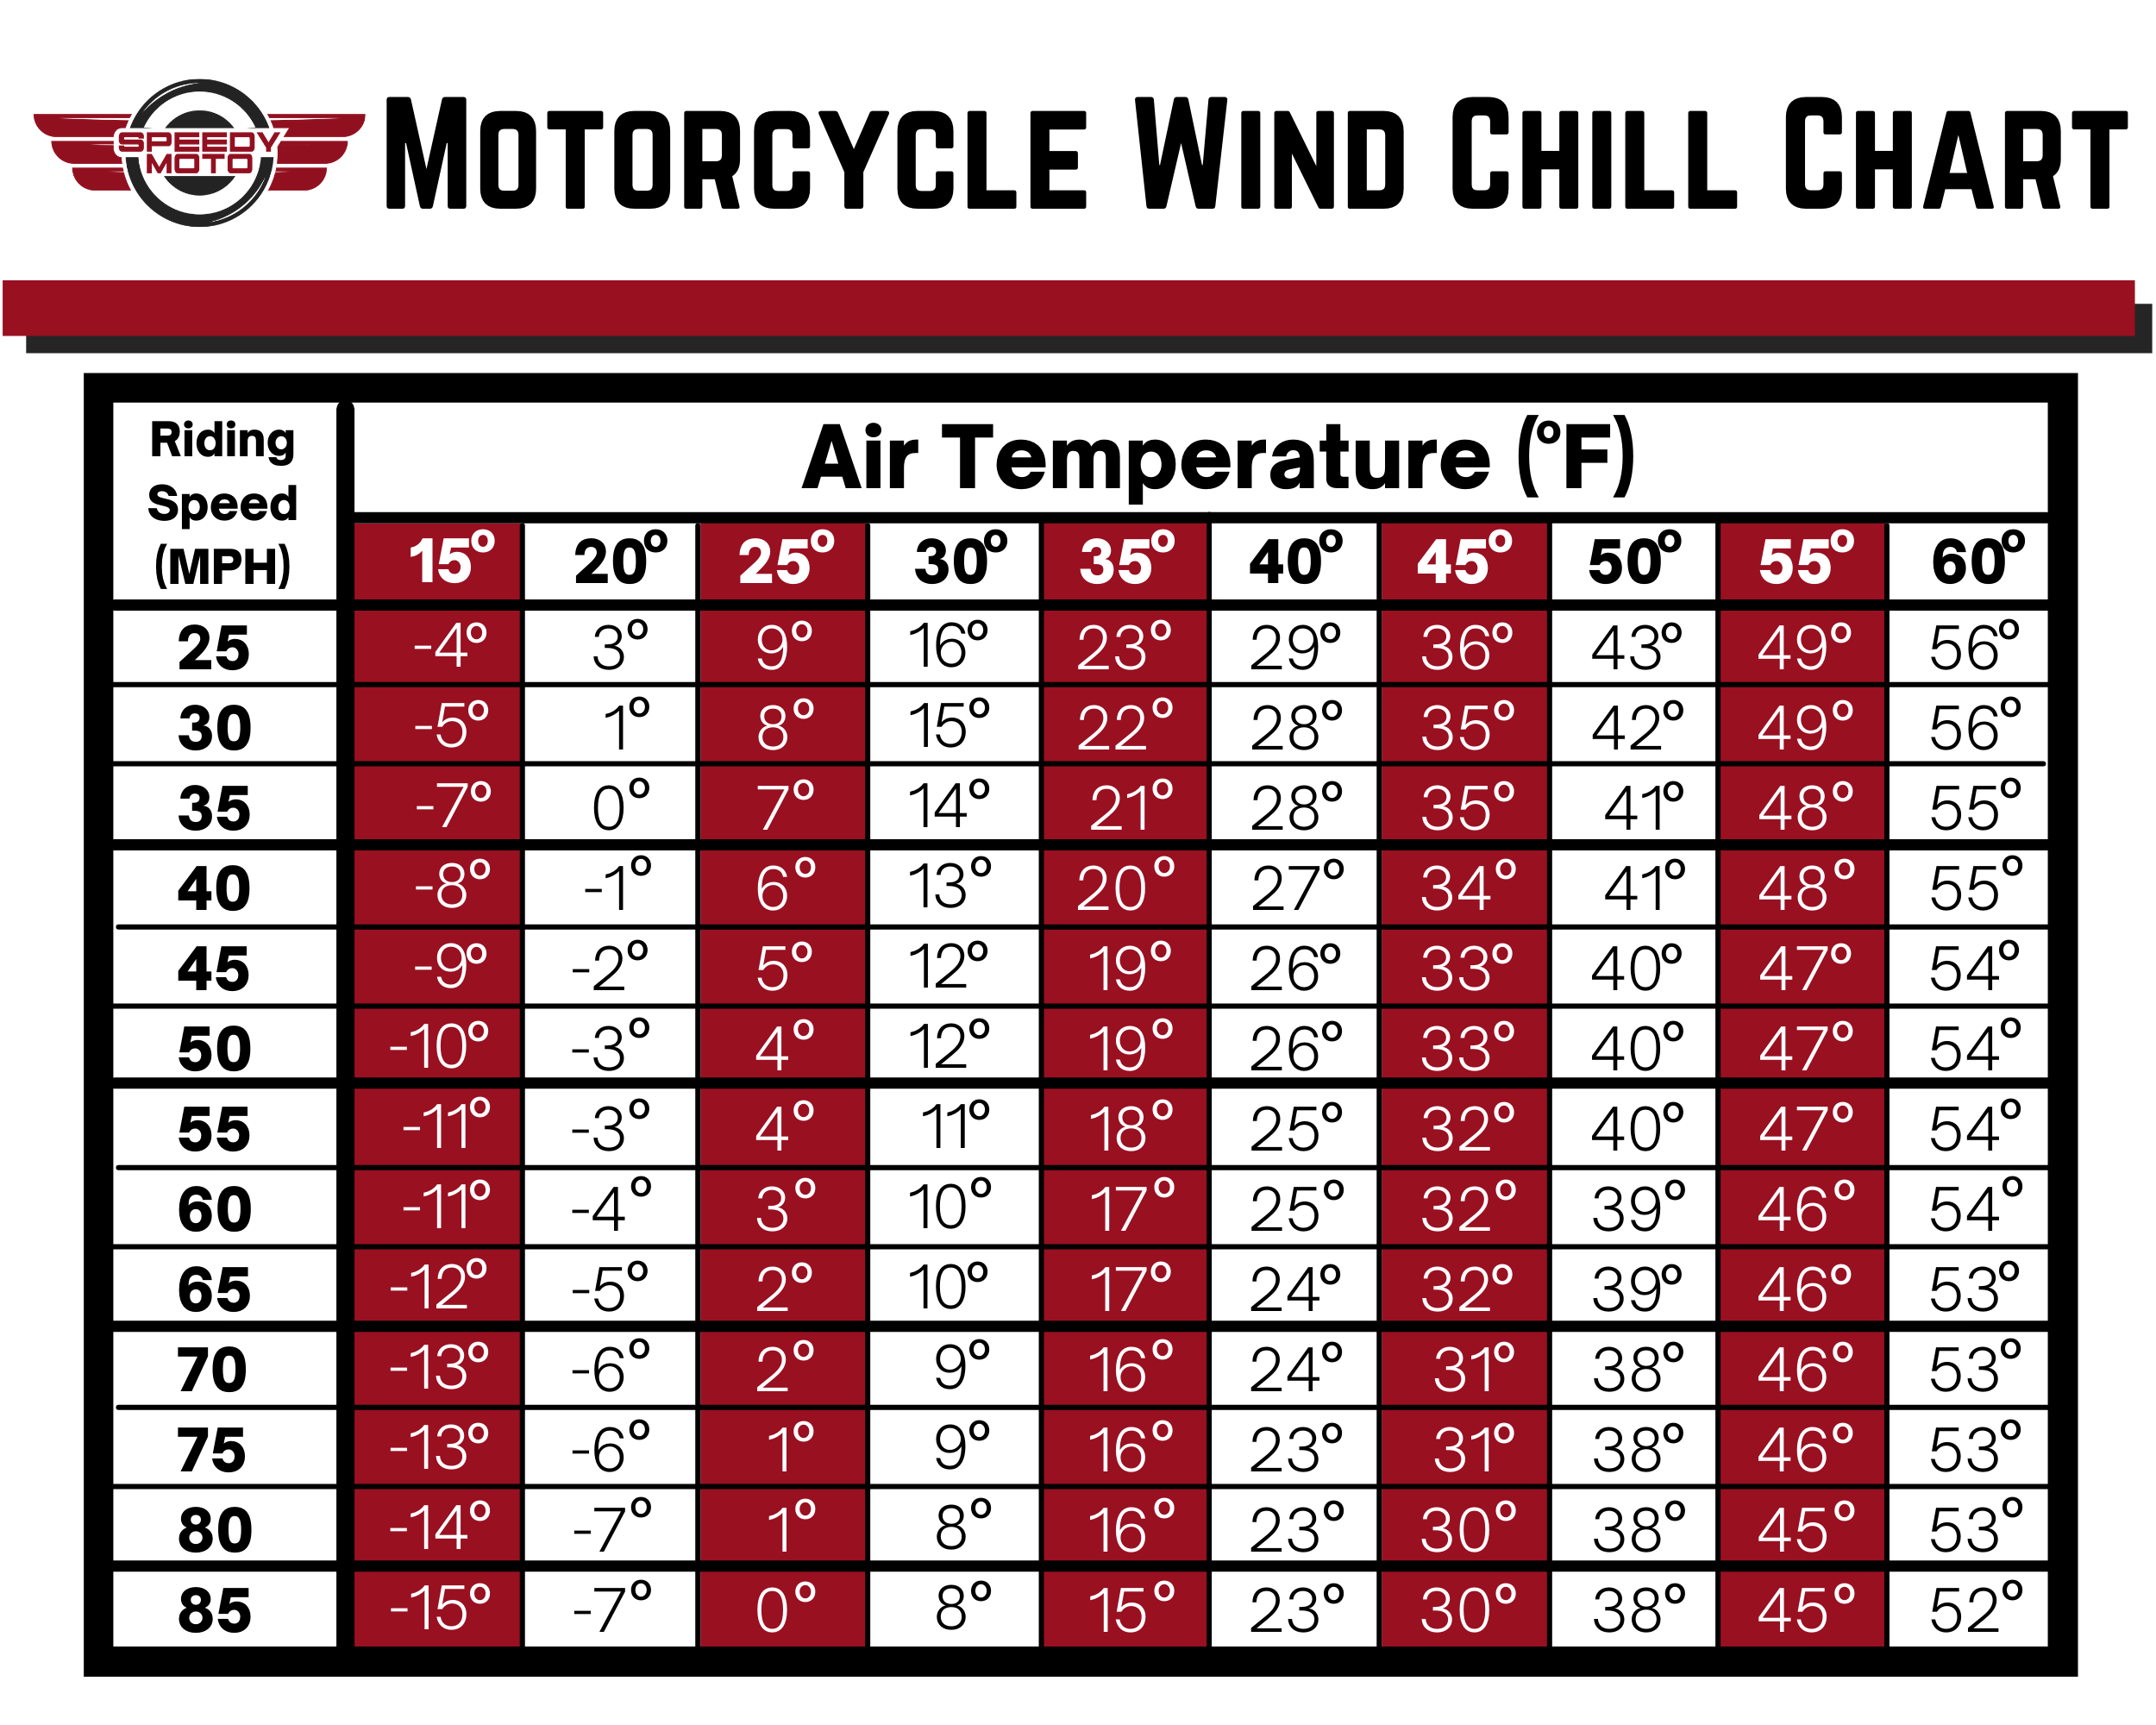 Motorcycle Wind Chill Charts 2021 Guide To Staying Warm While Riding